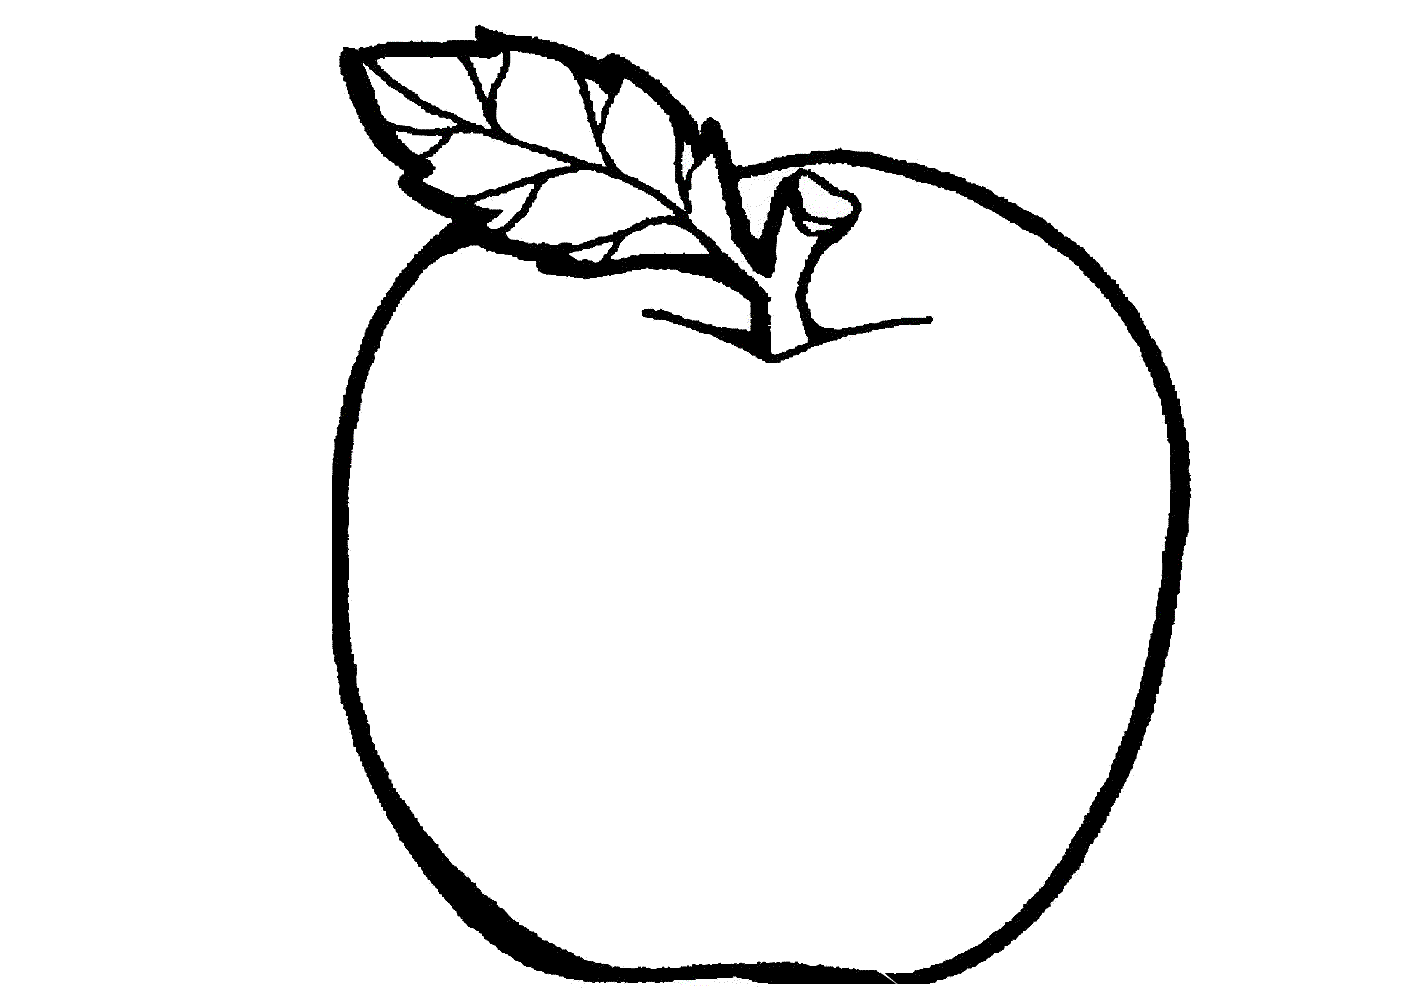 Download Printable Apple Coloring Pages: Easy Fruits PDFs - Print ...